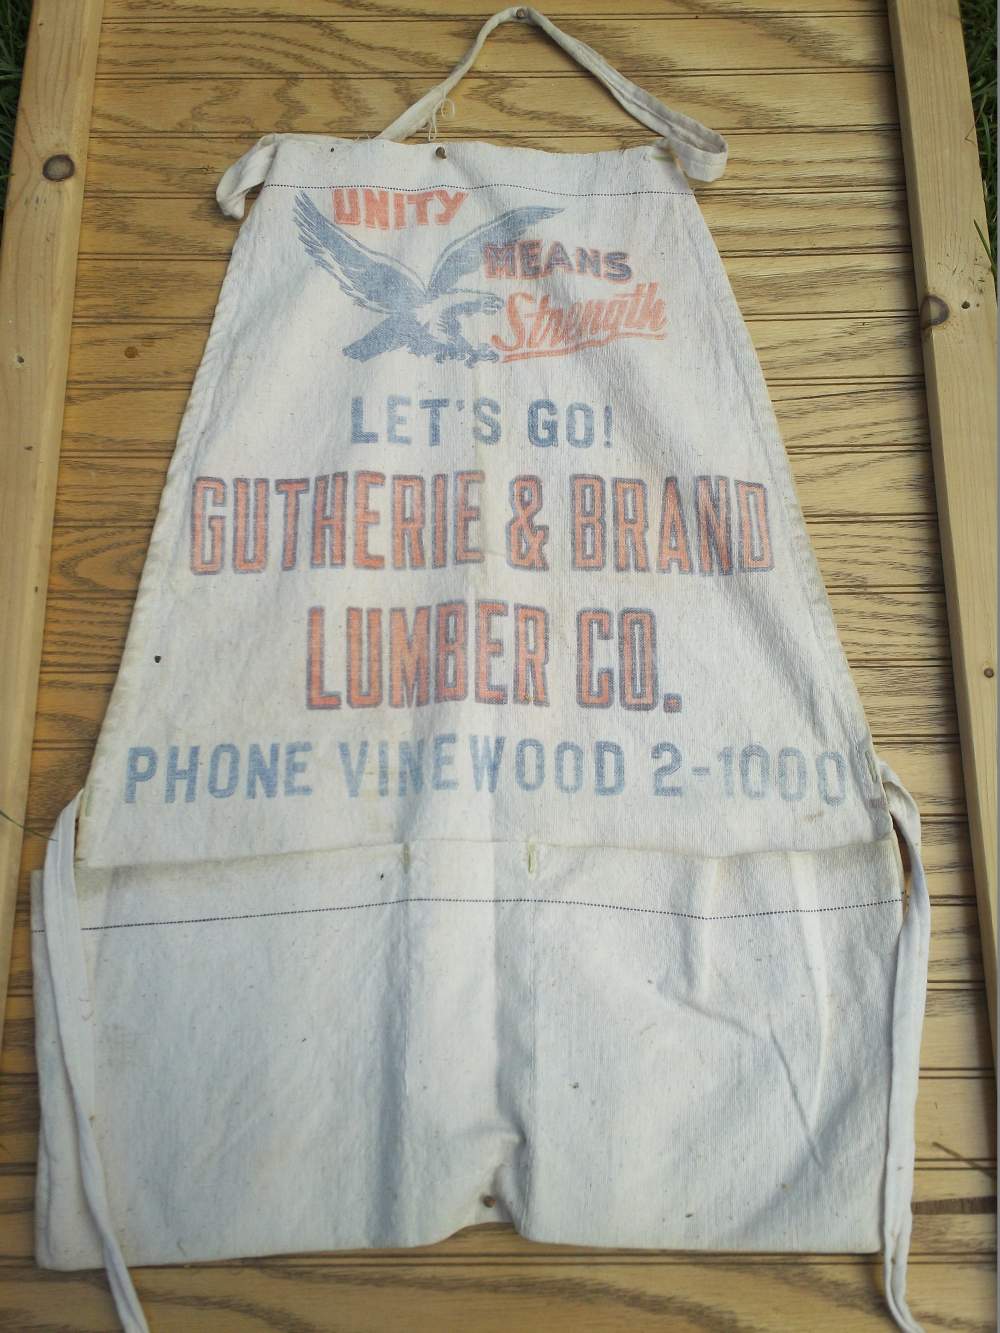 Name:  GLC Gutherie and Brand Lumber.jpg
Views: 831
Size:  142.7 KB